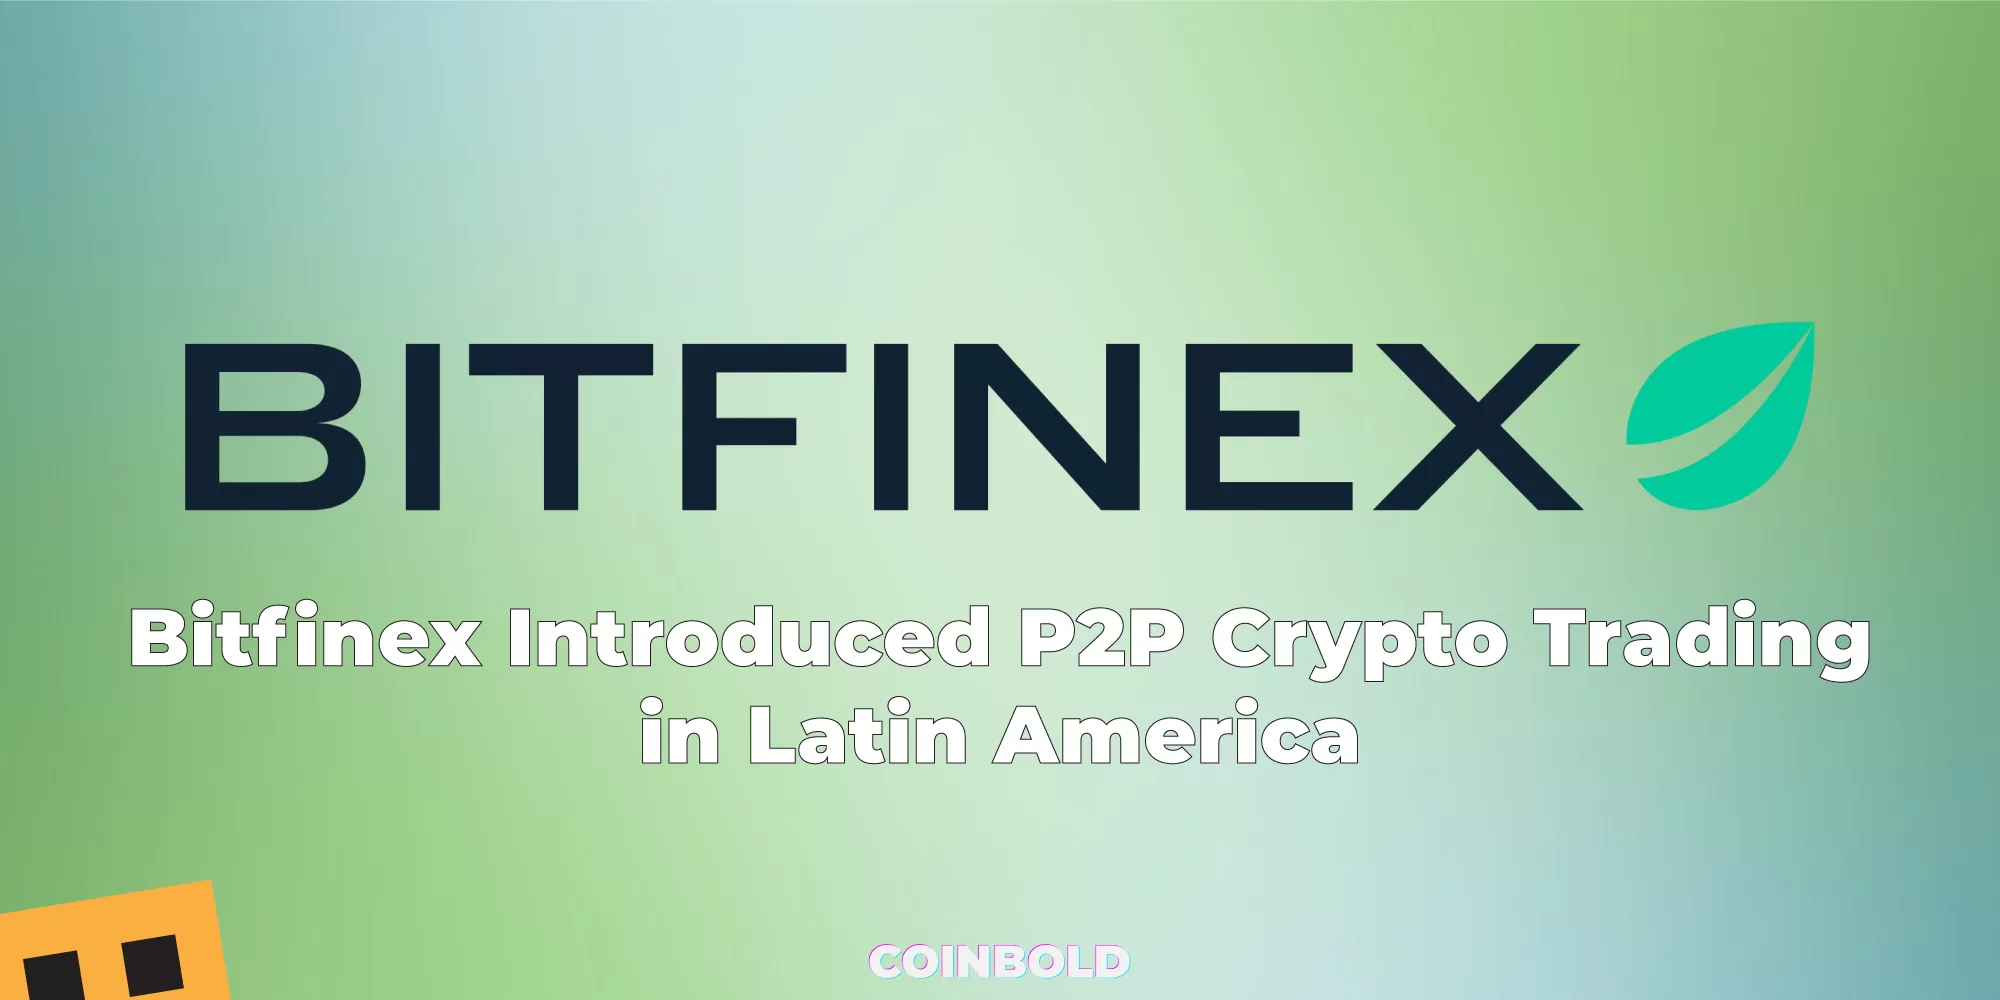 Bitfinex Introduced P2P Crypto Trading in Latin America